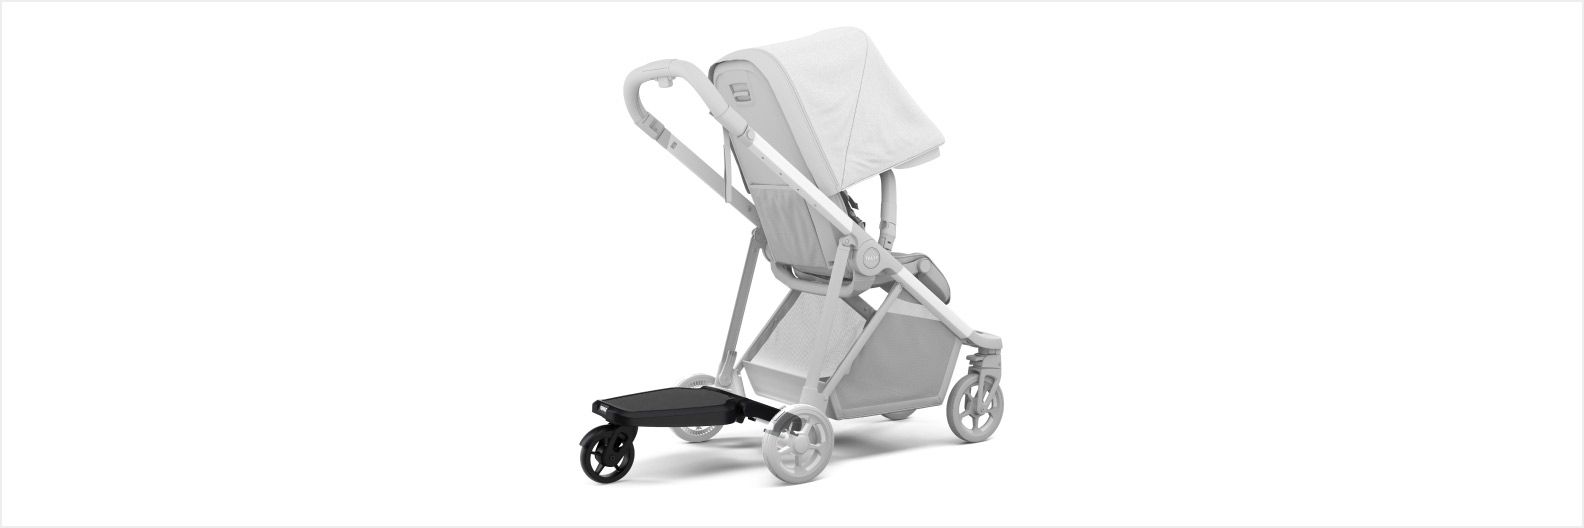 A 3D rendition of the Thule Shine stroller accessory, the Thule Rider Board, with a white background.